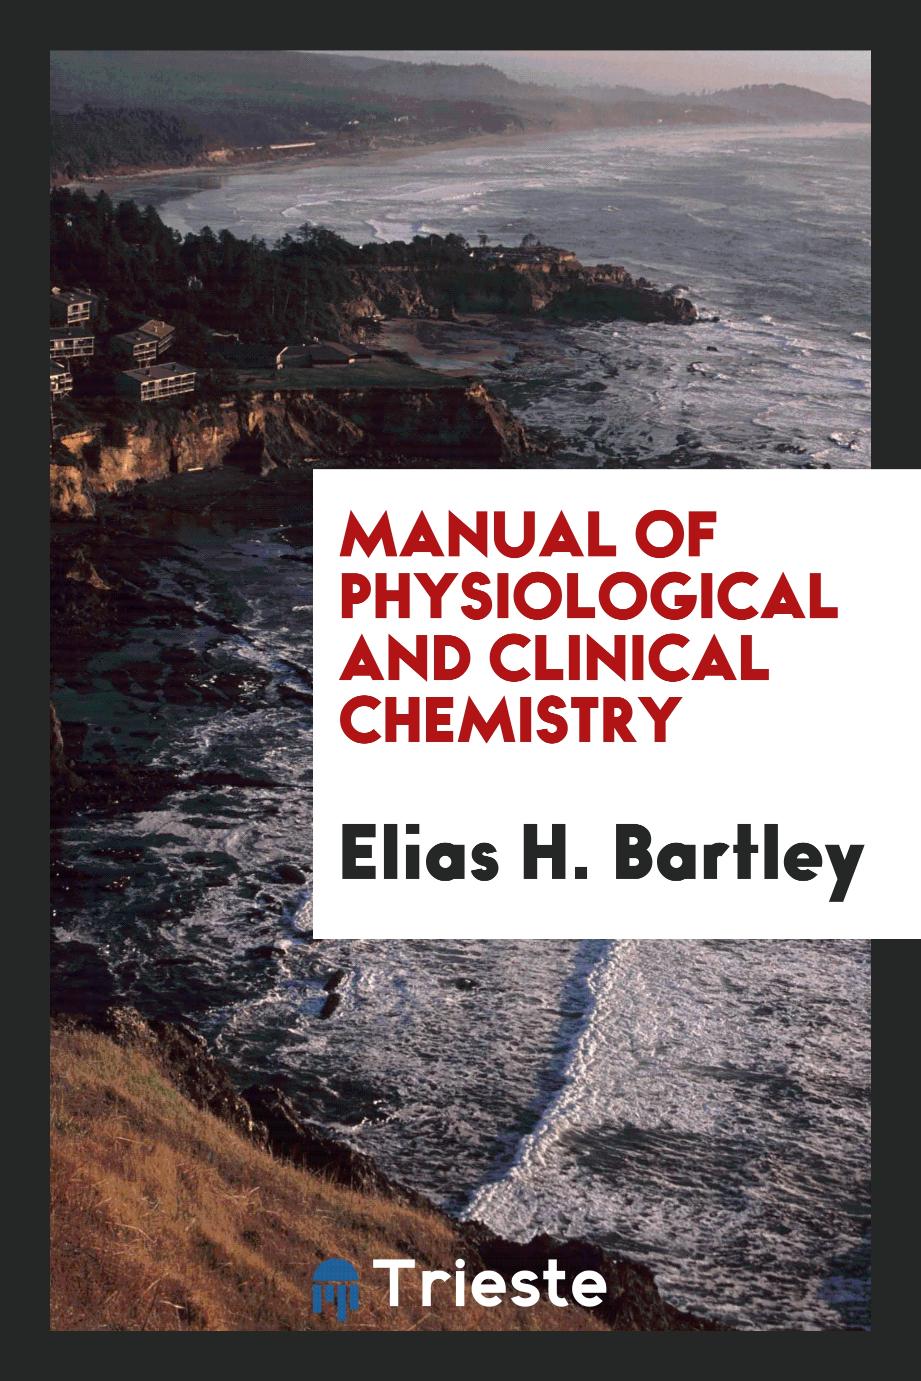 Manual of Physiological and Clinical Chemistry